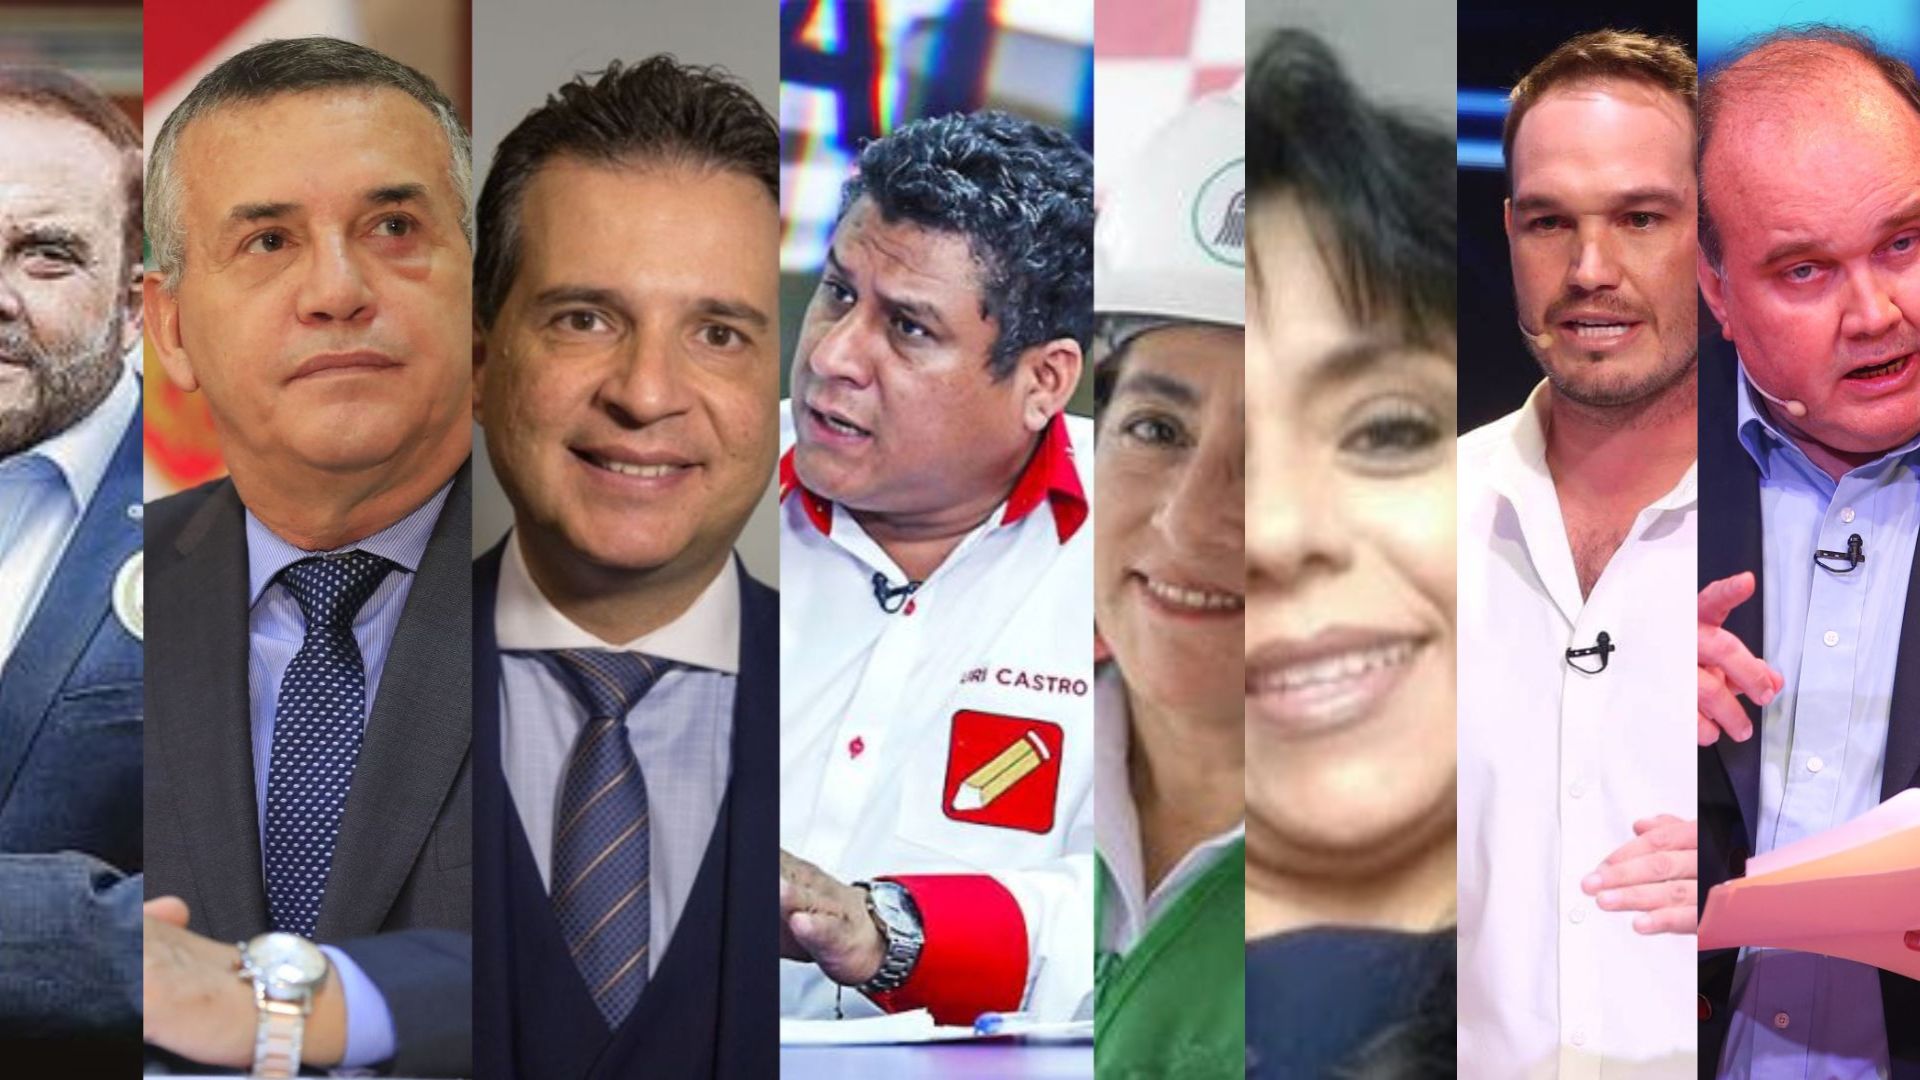 The eight candidates for the mayoral office of Lima will debate for the last time this Sunday, September 25th.